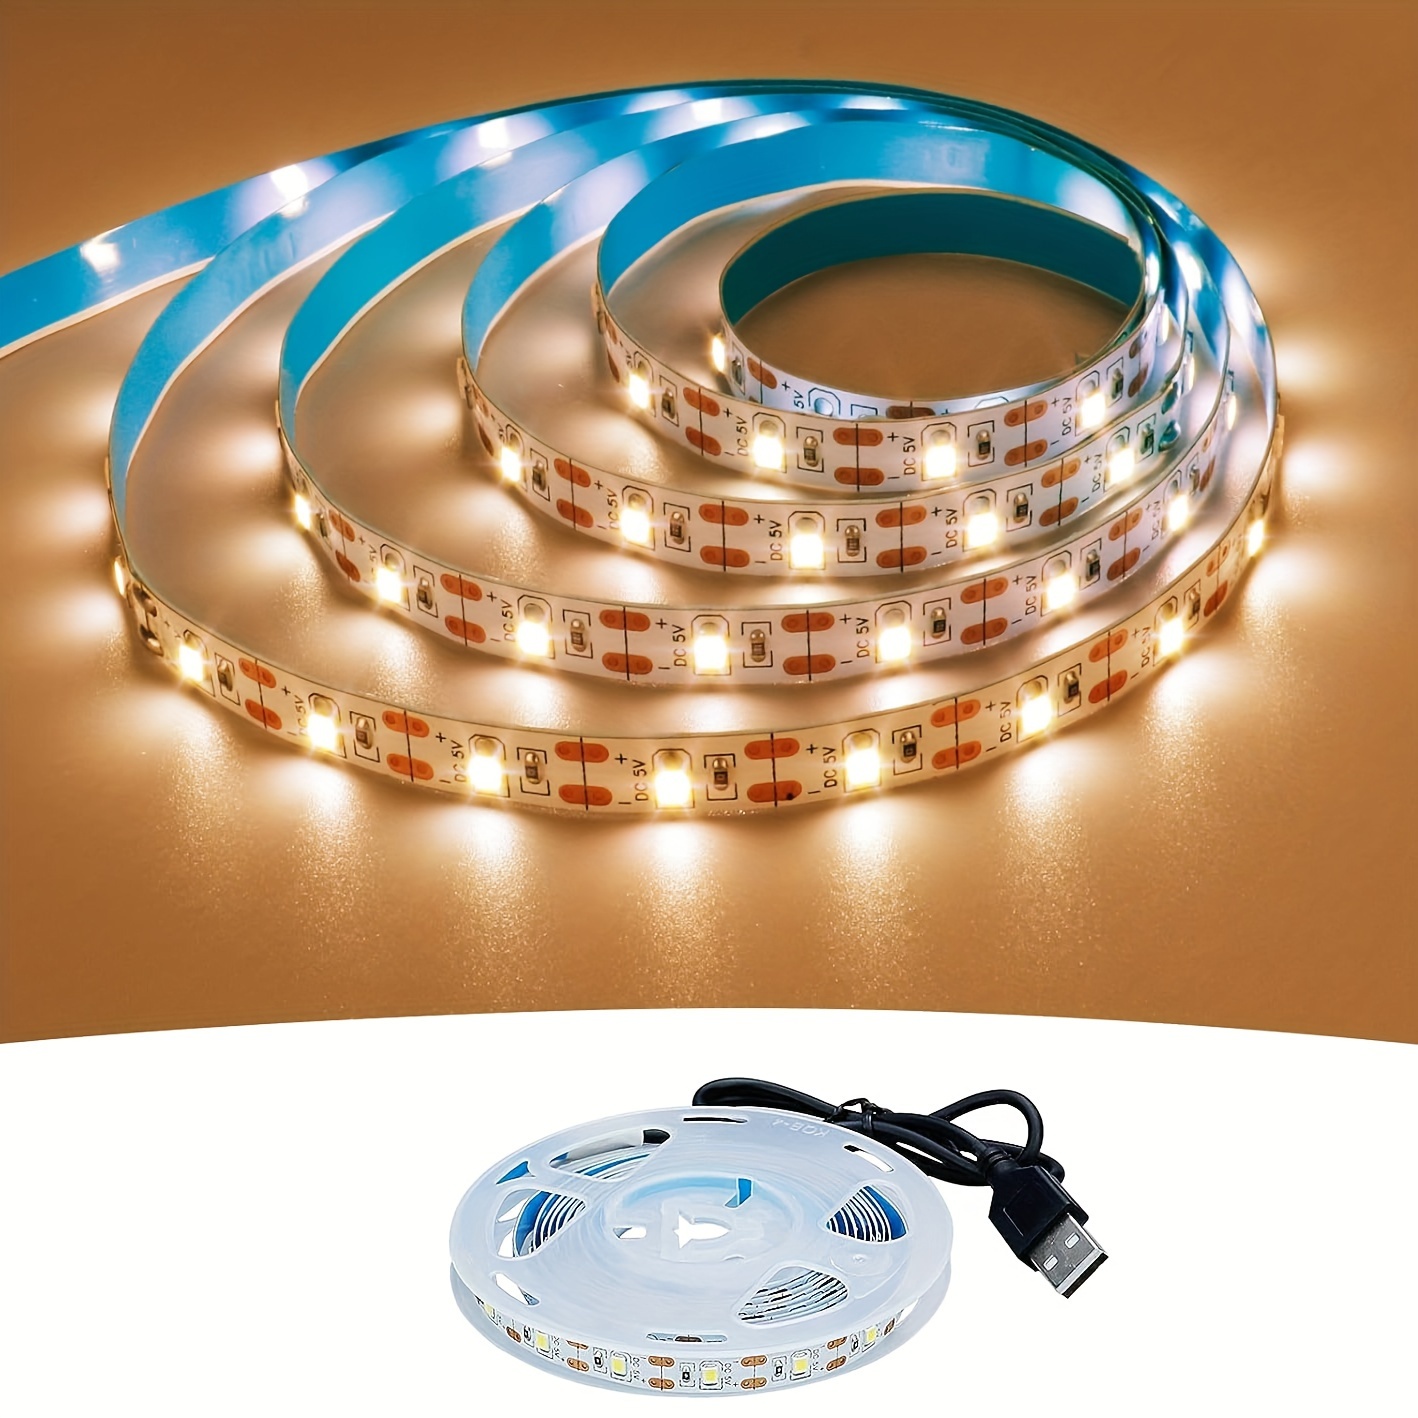 6FT - USB Powered - 5V LED COB Strip Light Kit - Cuttable - Dimmer Switch  Included